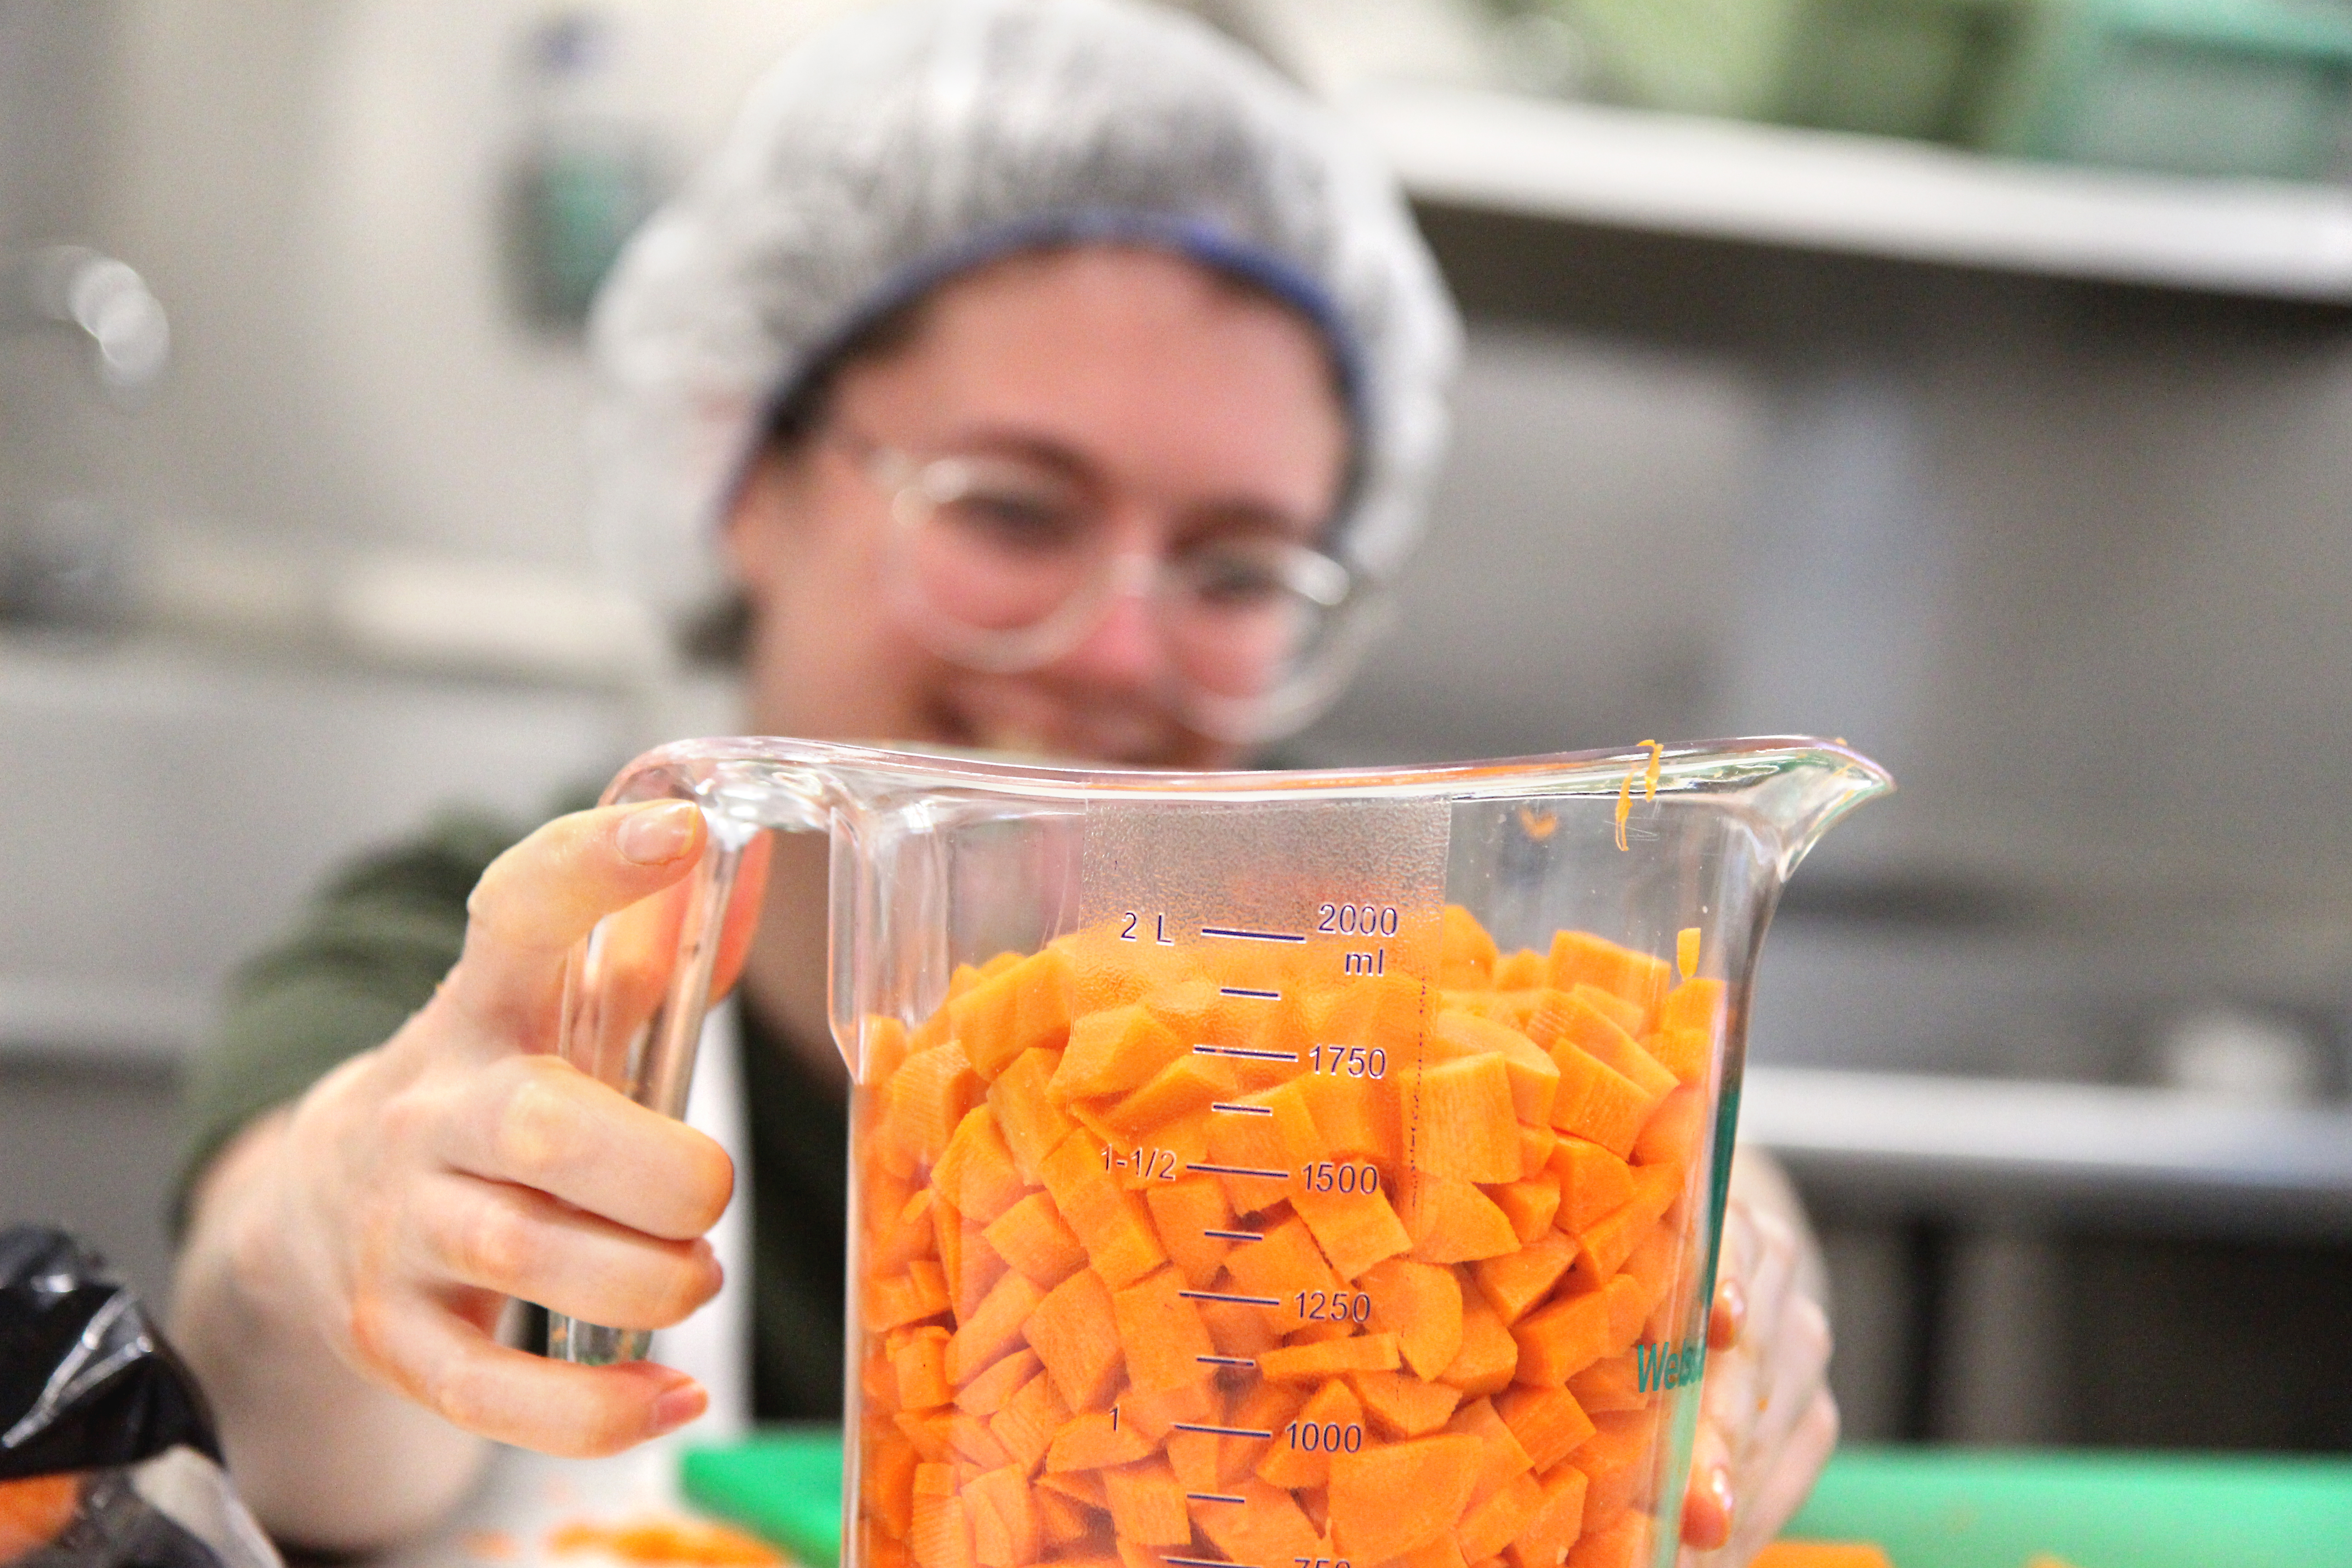 A person holding up a measuring cup filled with chopped carrots